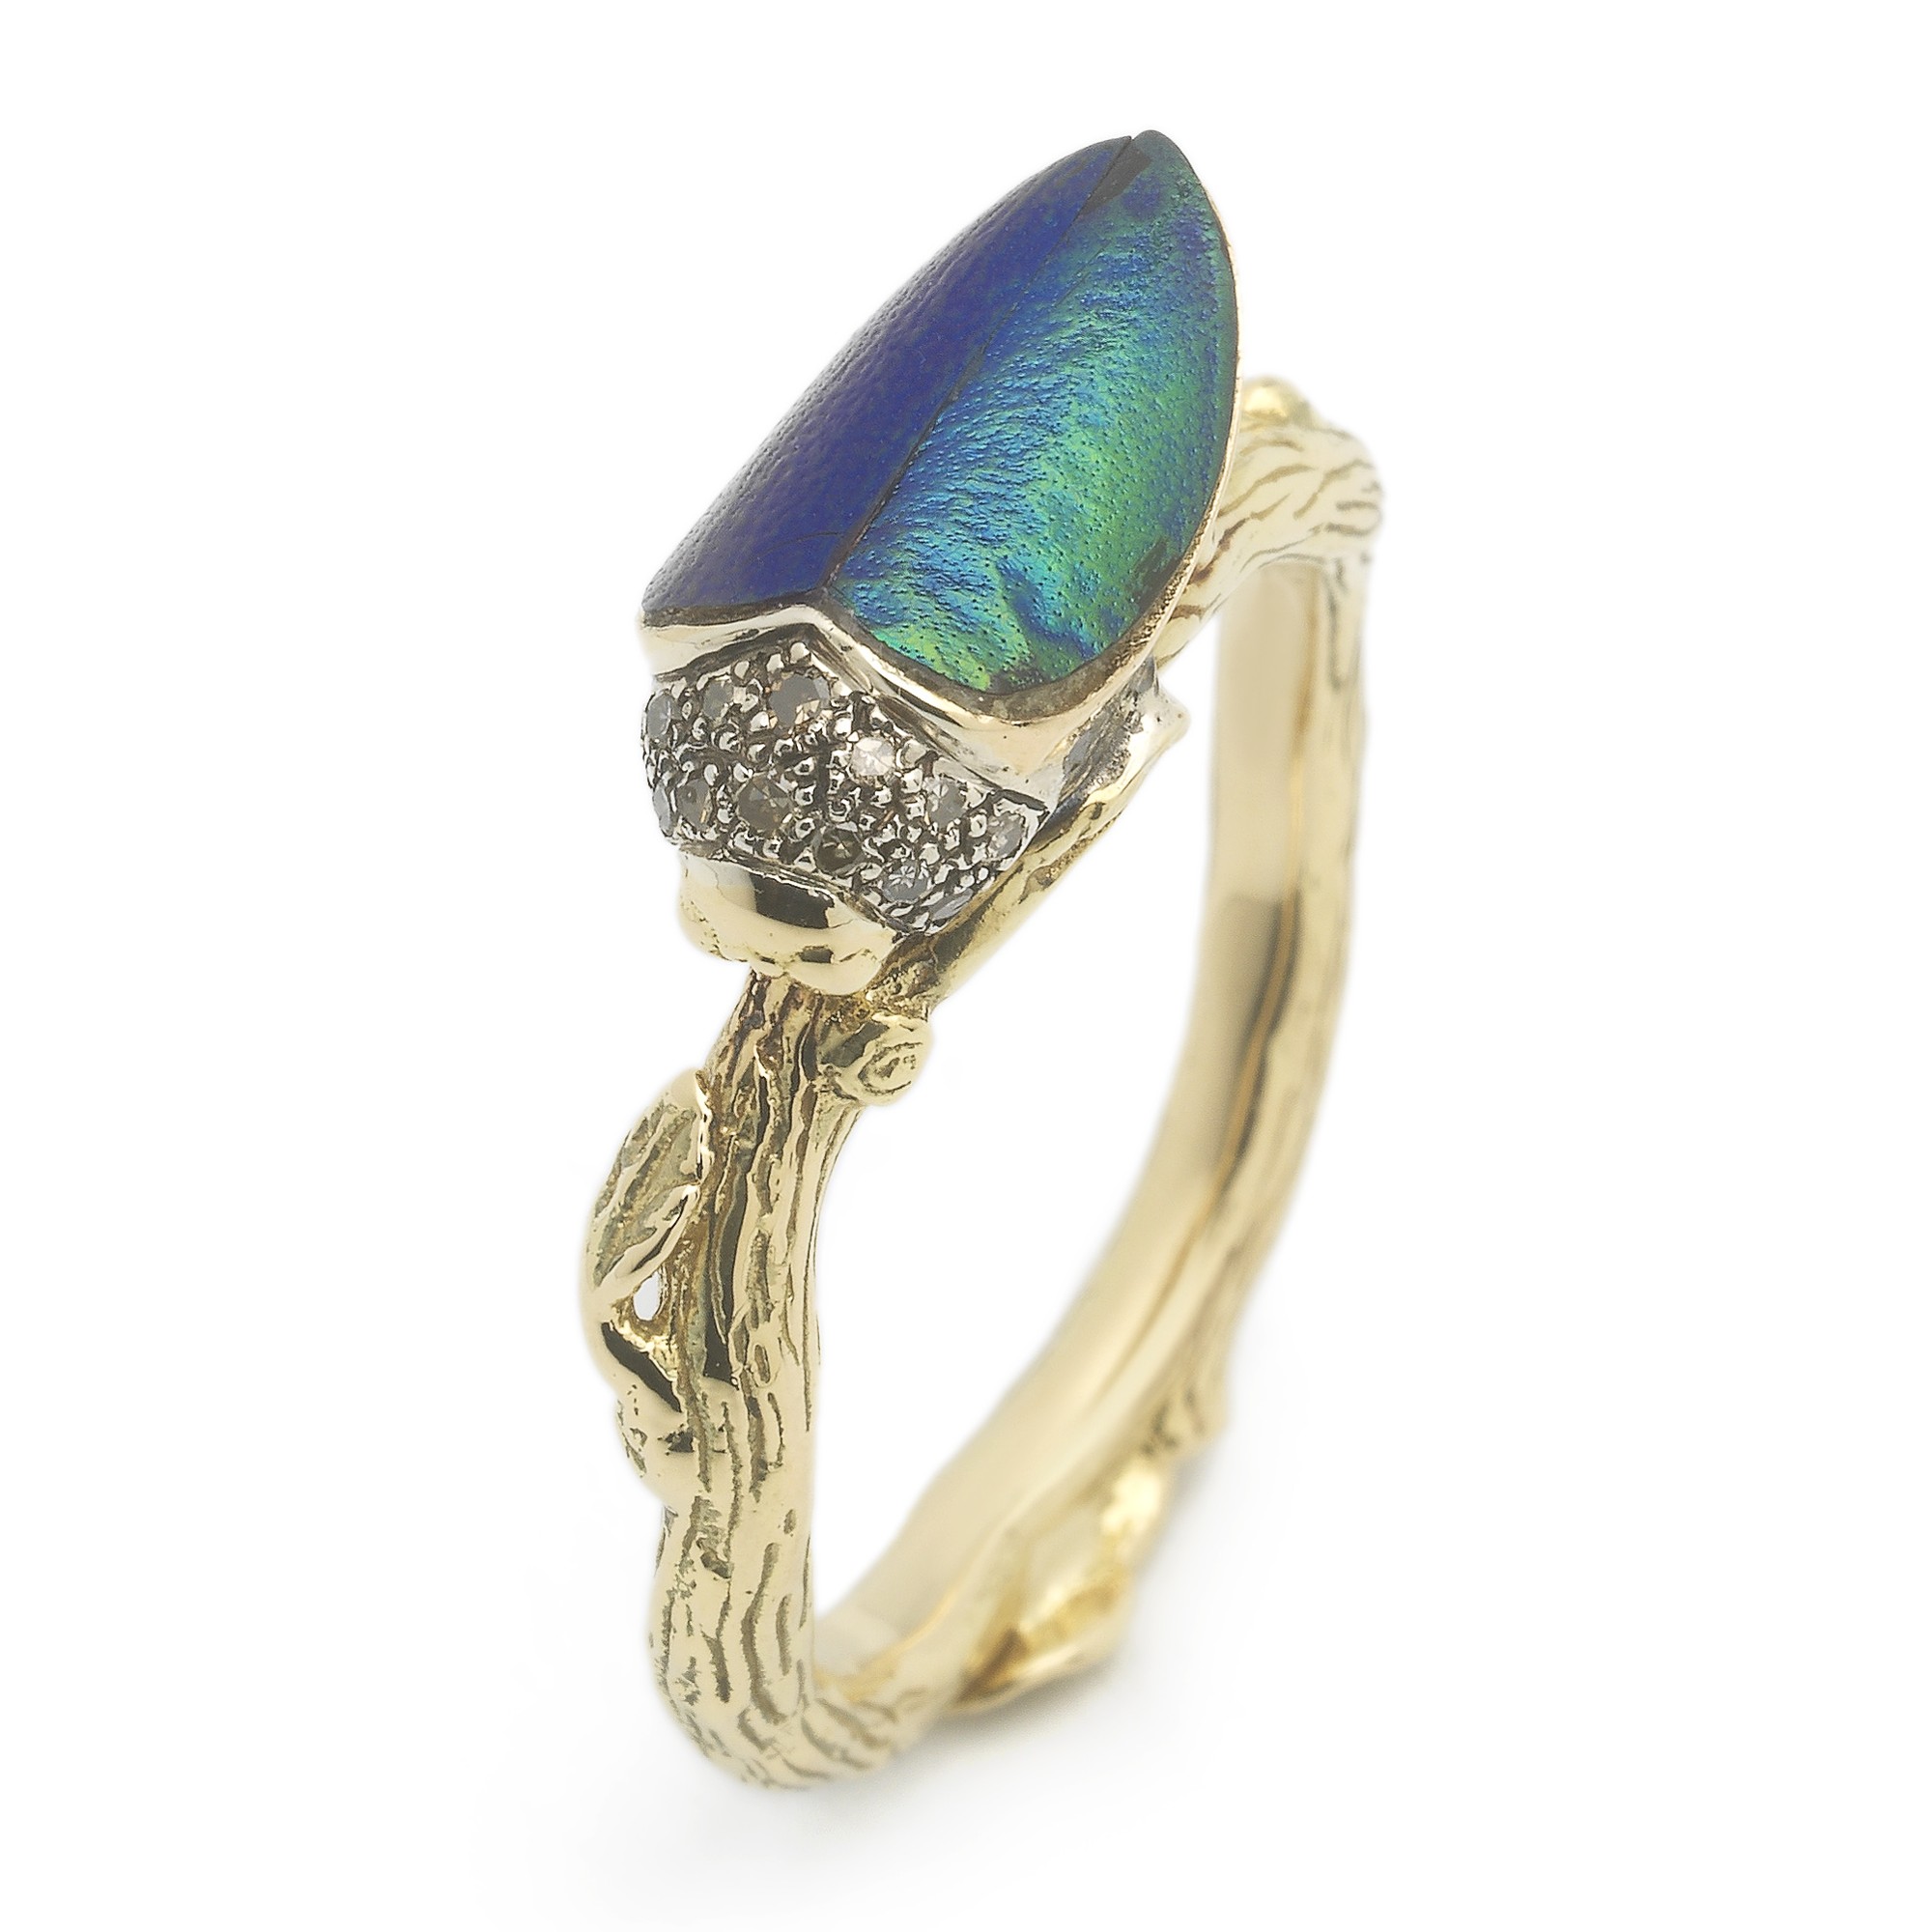 bibi-van-der-velden-scarab-collection-stackable-scarab-ring-sterling-silver-18ct-yellow-gold-scarab-wing-and-brown-diamonds